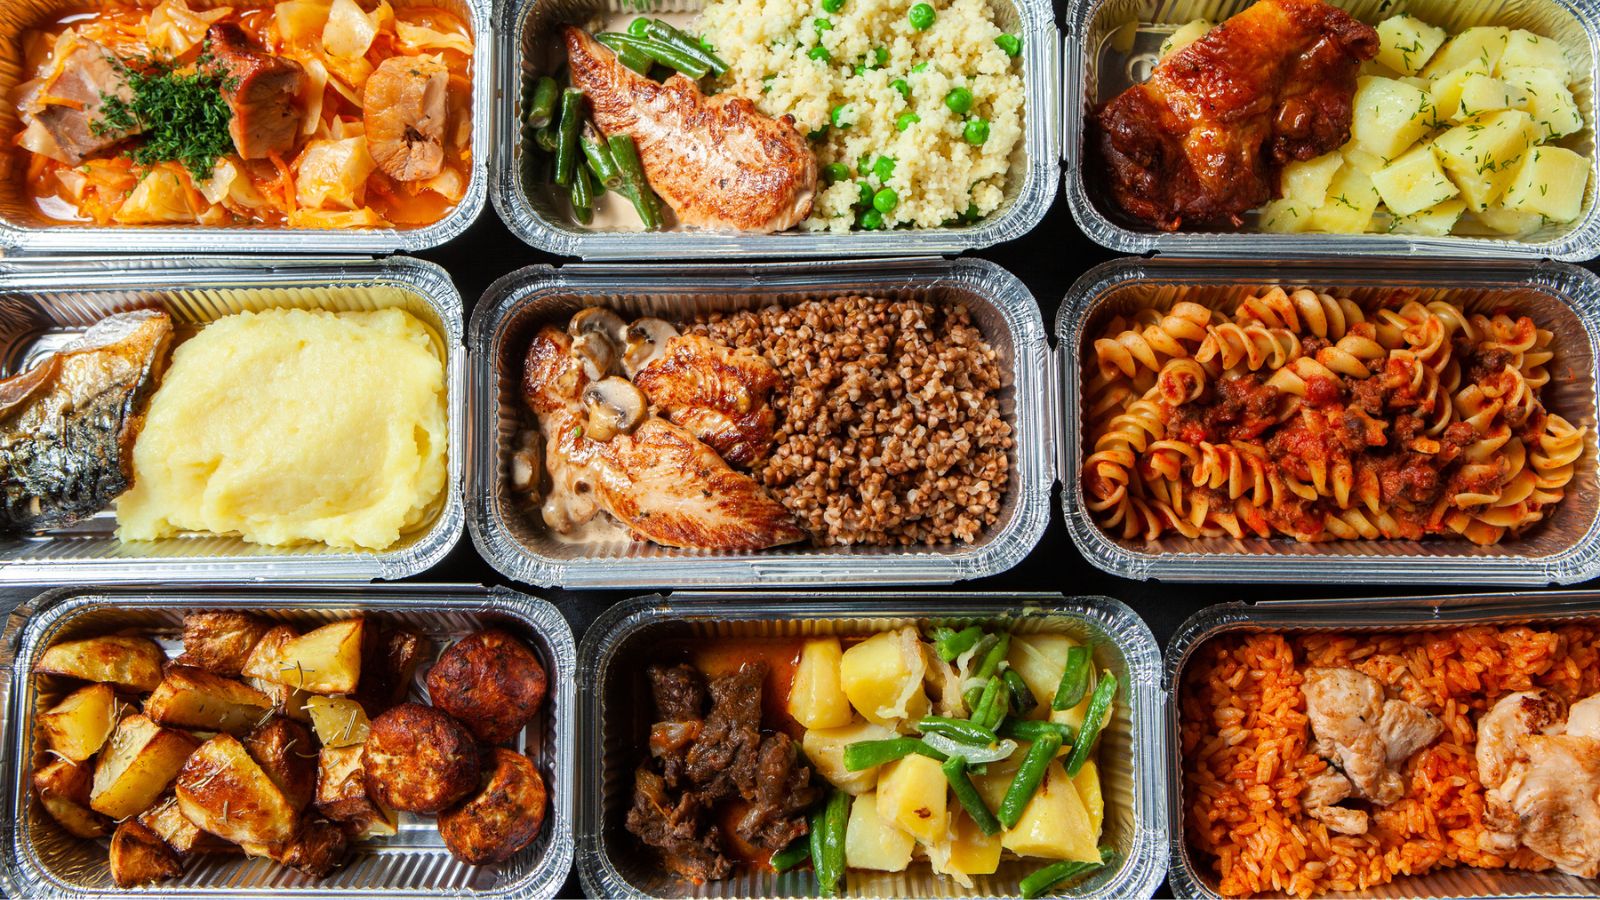 Savor Delicious and Nutritious Office Lunches with These 22 Lunchbox Inspirations